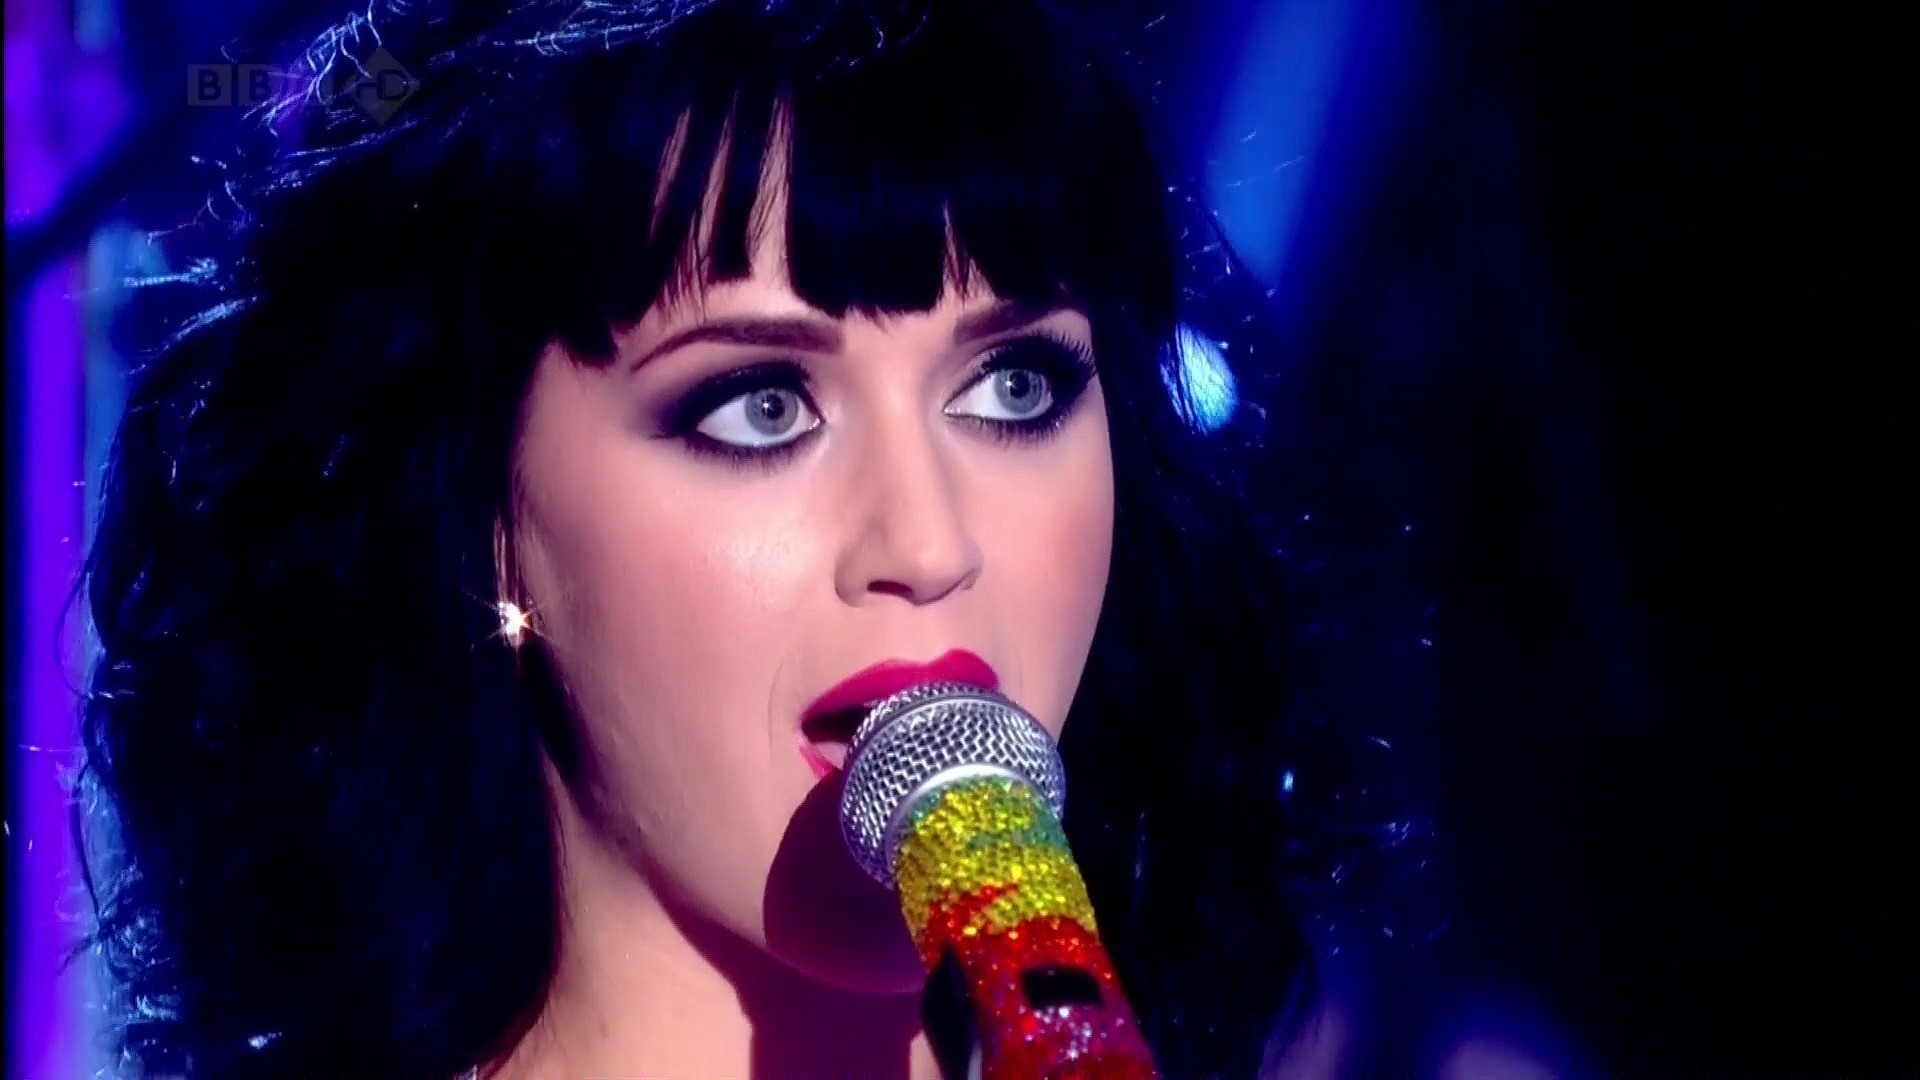 People 1920x1080 Katy Perry singer women celebrity open mouth music dark hair face microphone